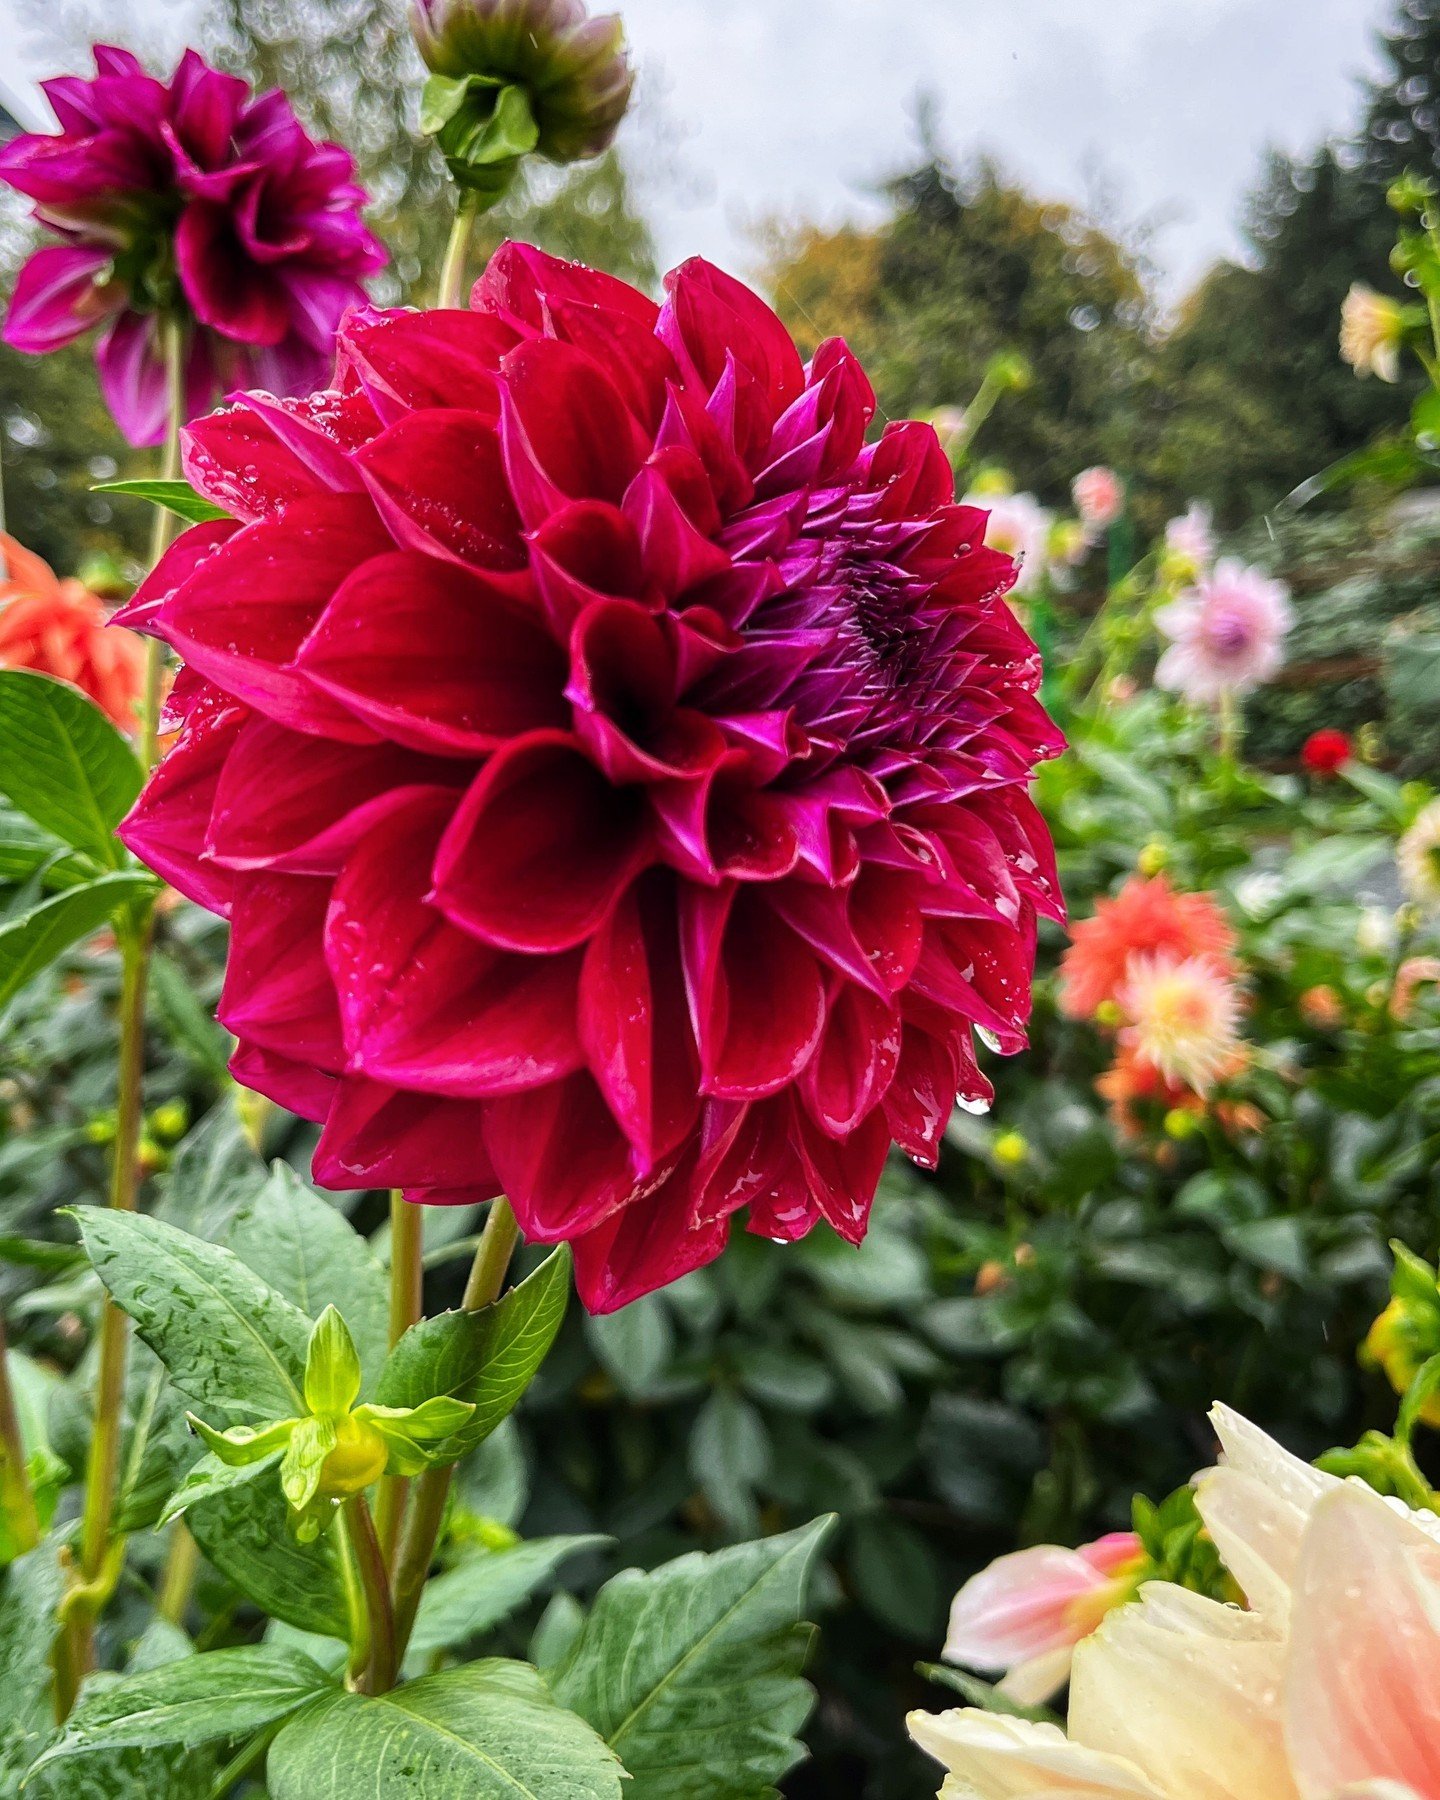 April Dahlia News
Shipping Update, Tuber Expectations, Website Restock, Mother&rsquo;s Day Gift Ideas, Add-on Shipping